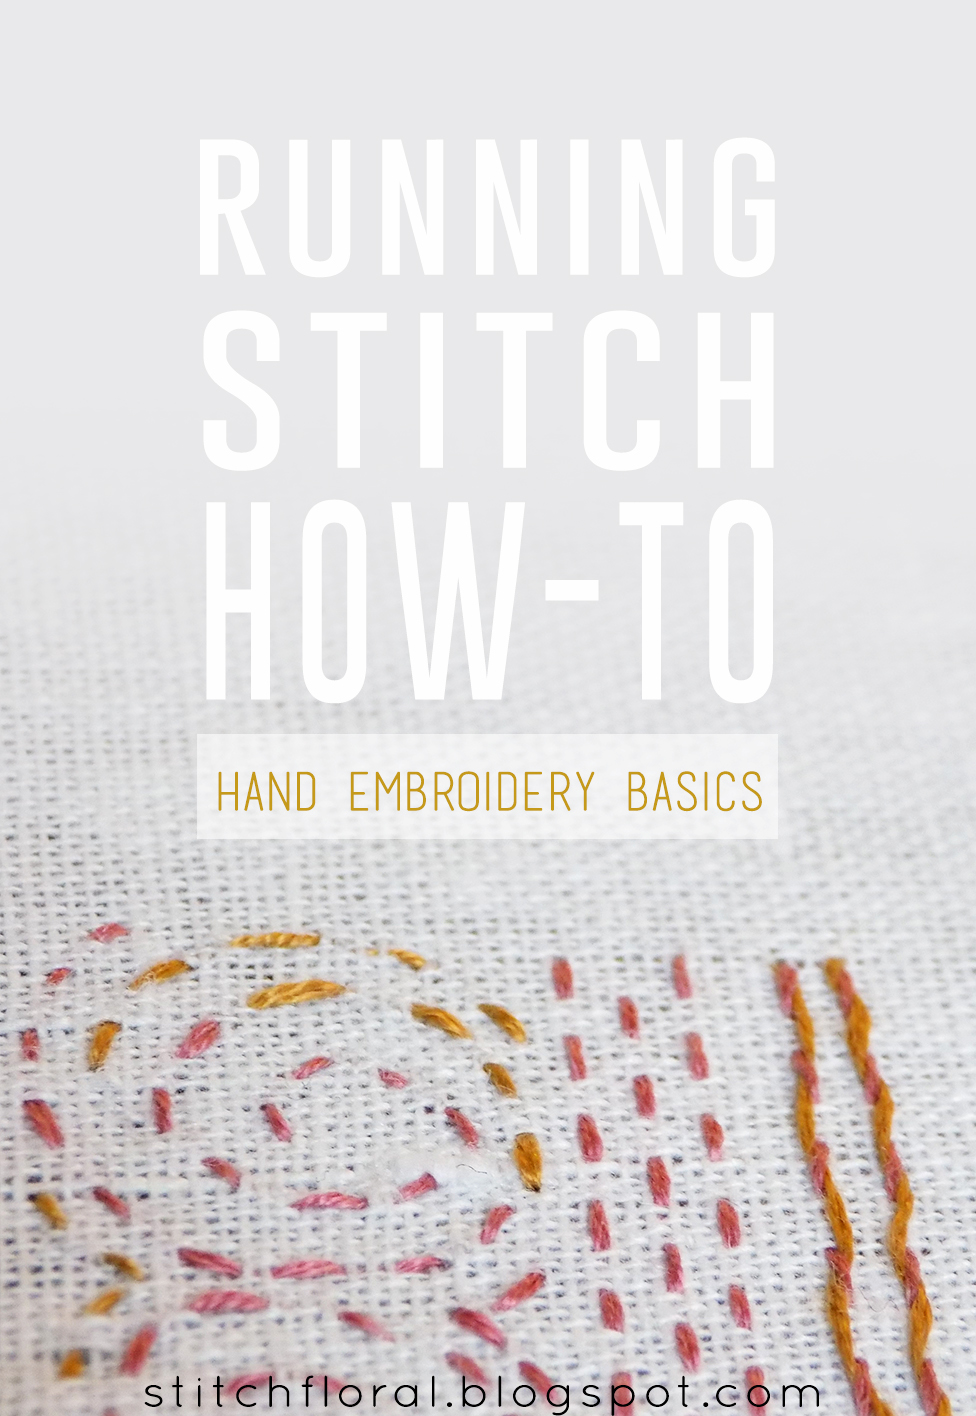 Basic Machine Stitches Tutorial, Get Started in Sewing